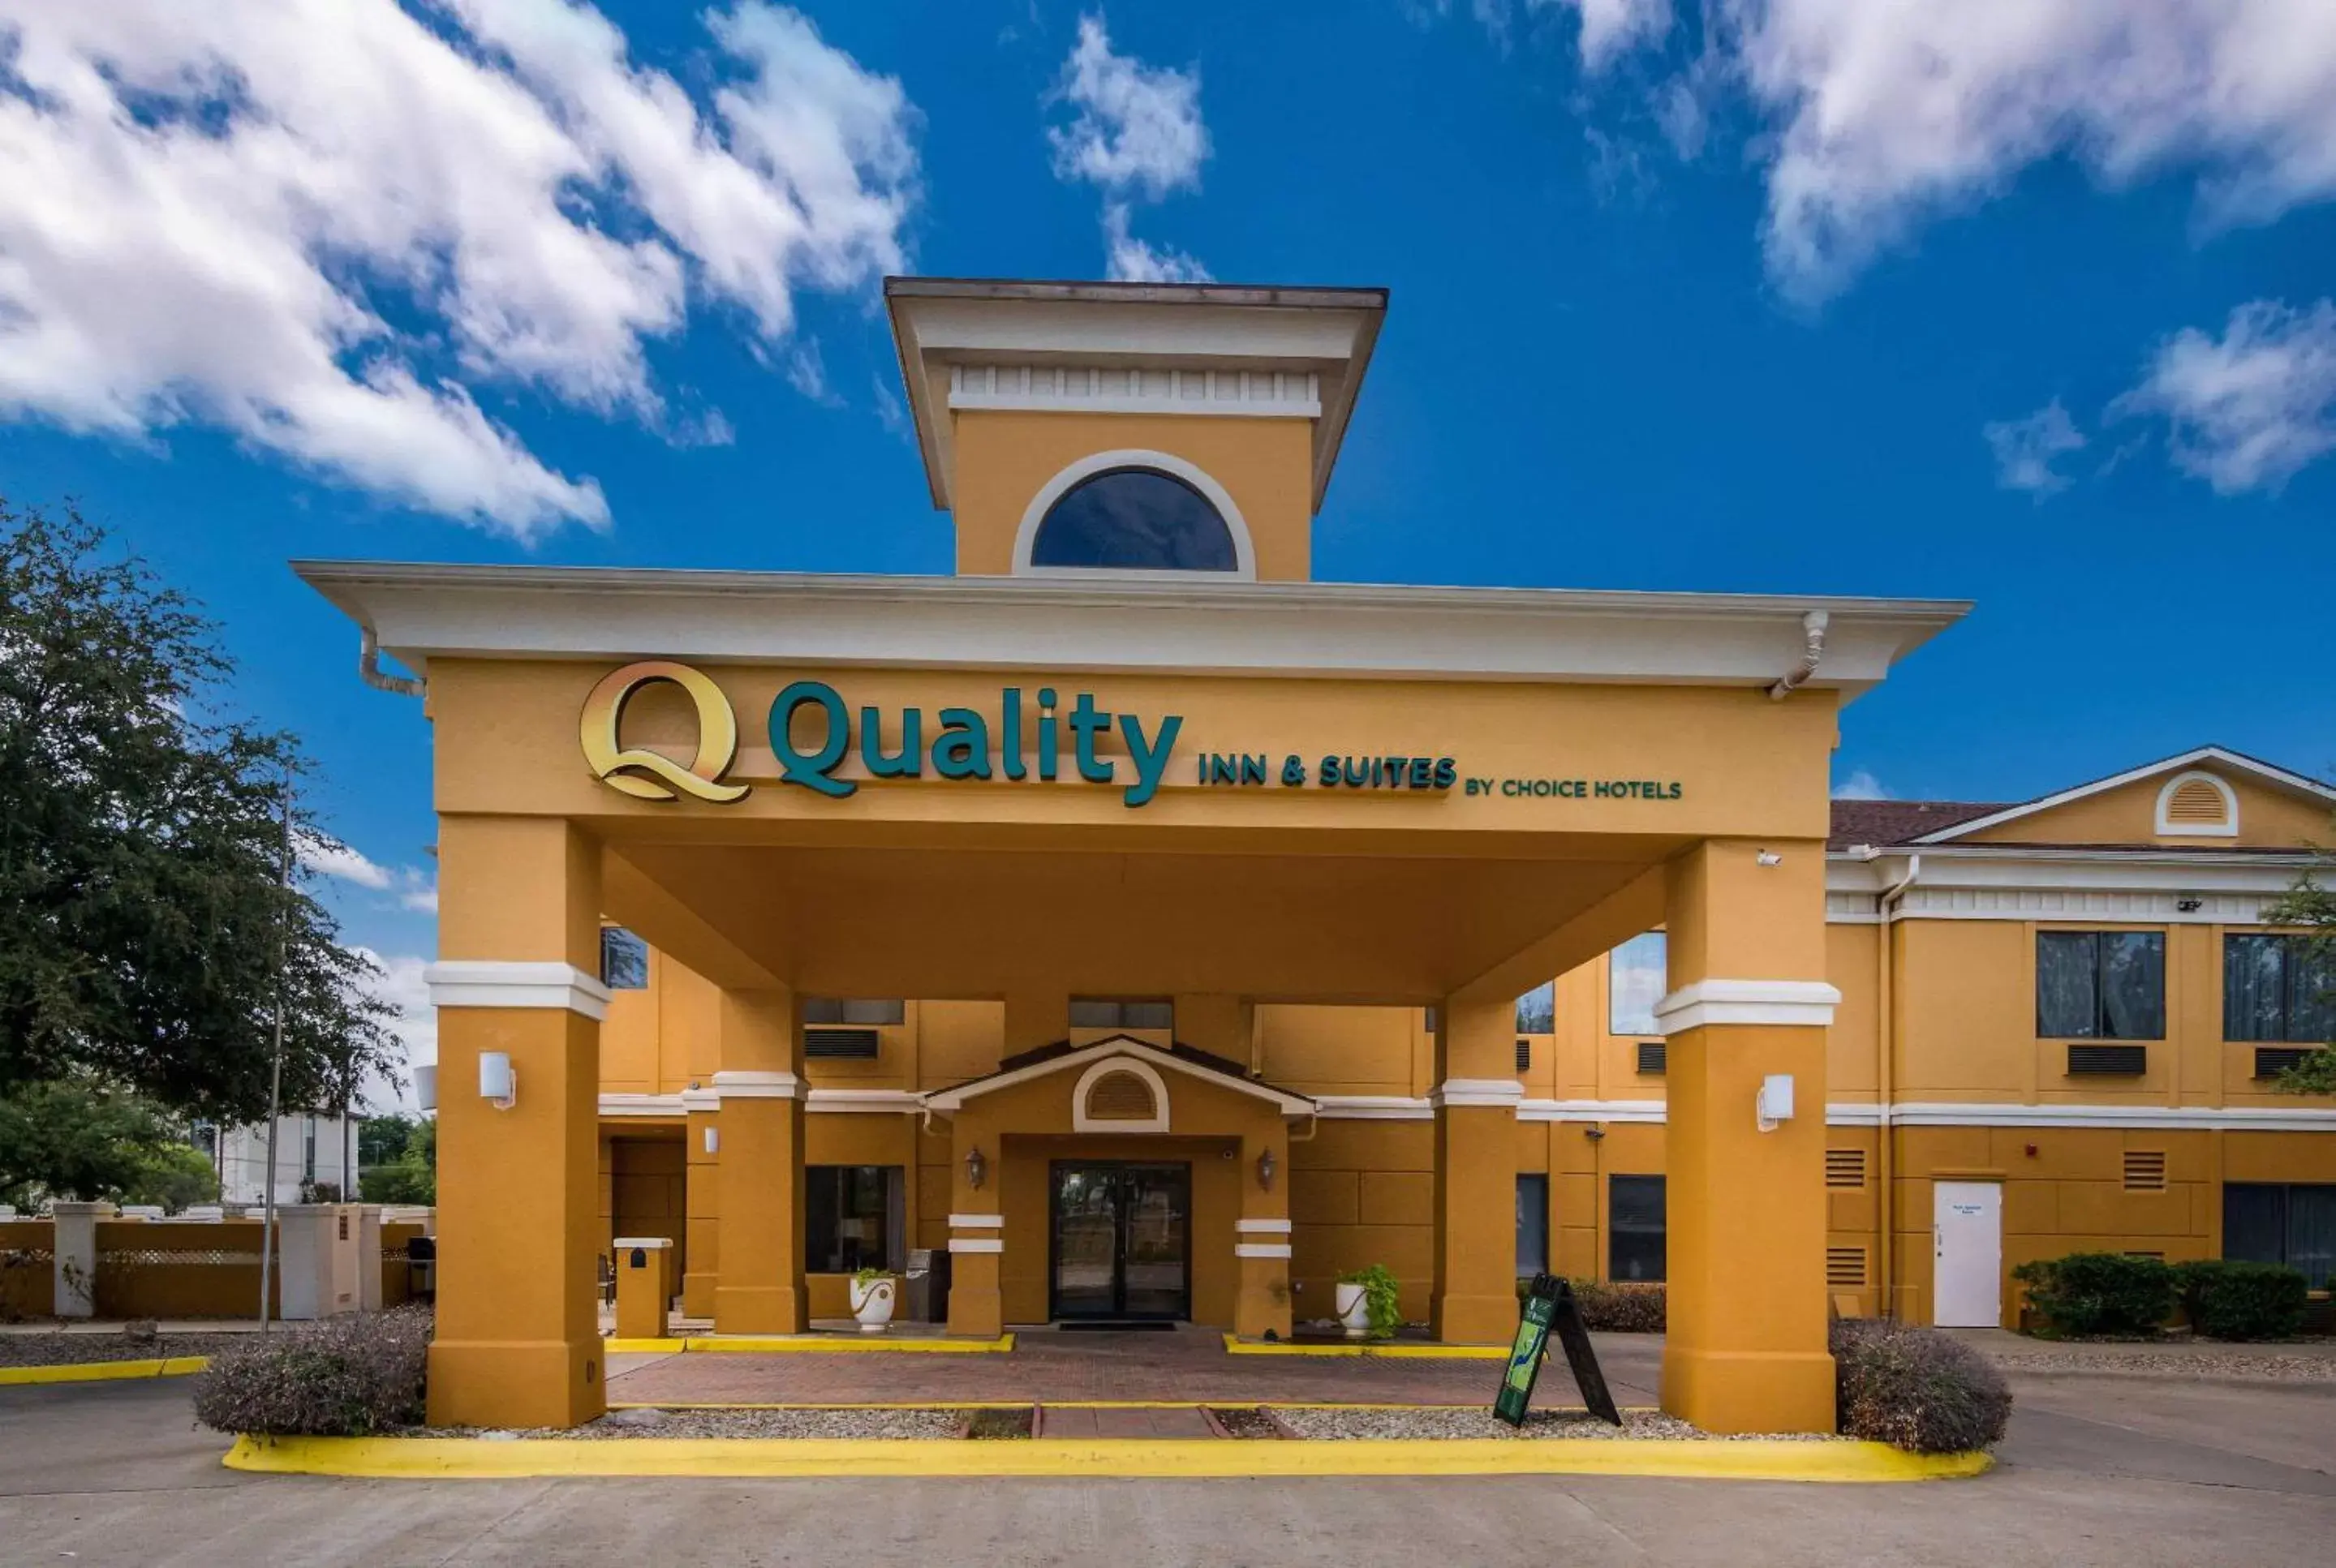 Property building in Quality Inn & Suites Granbury